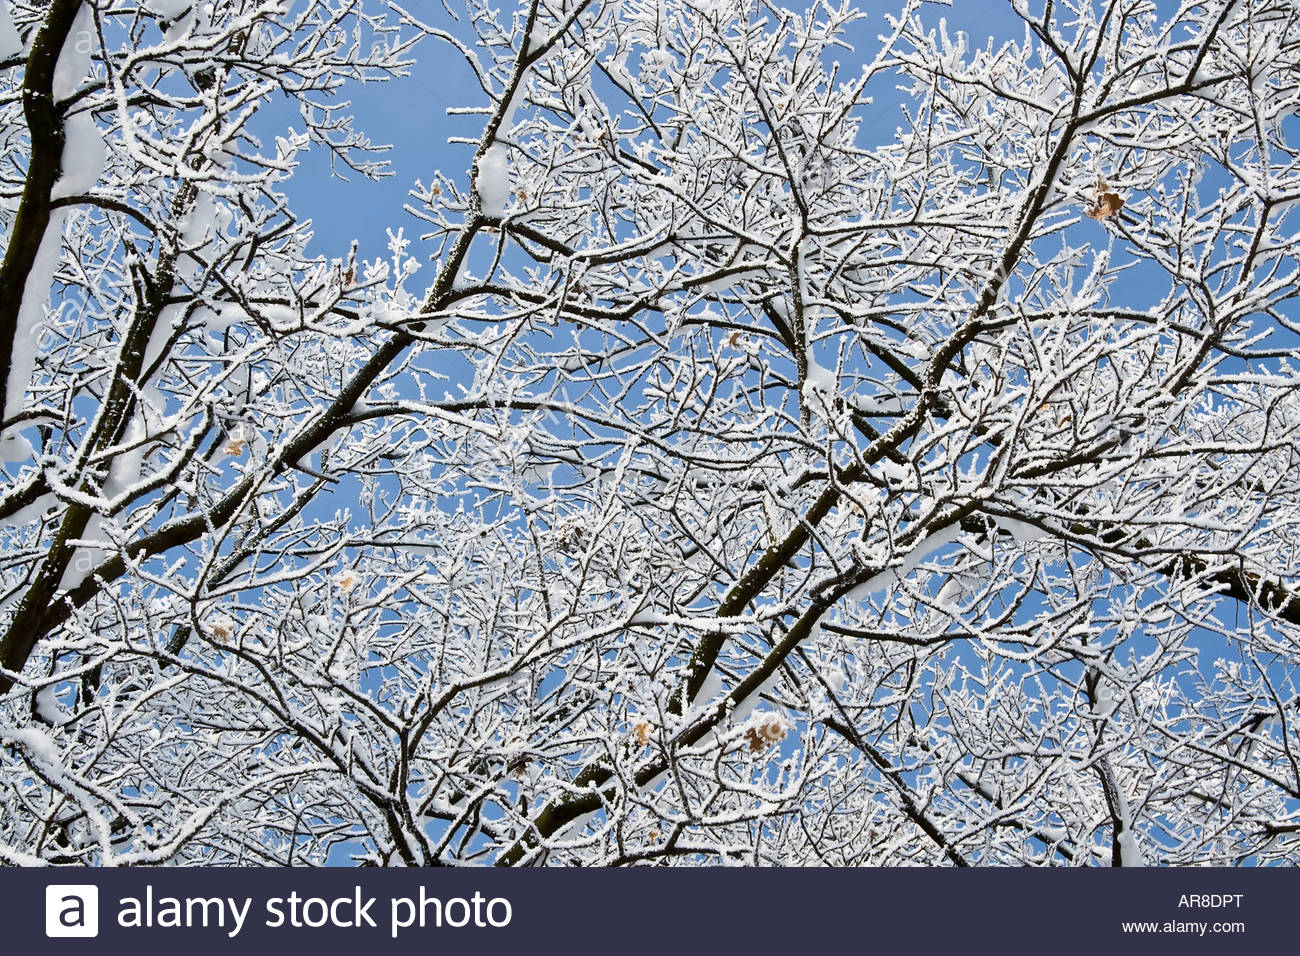 Winter Scene Background Of Snow Covered Branches Stock Photo